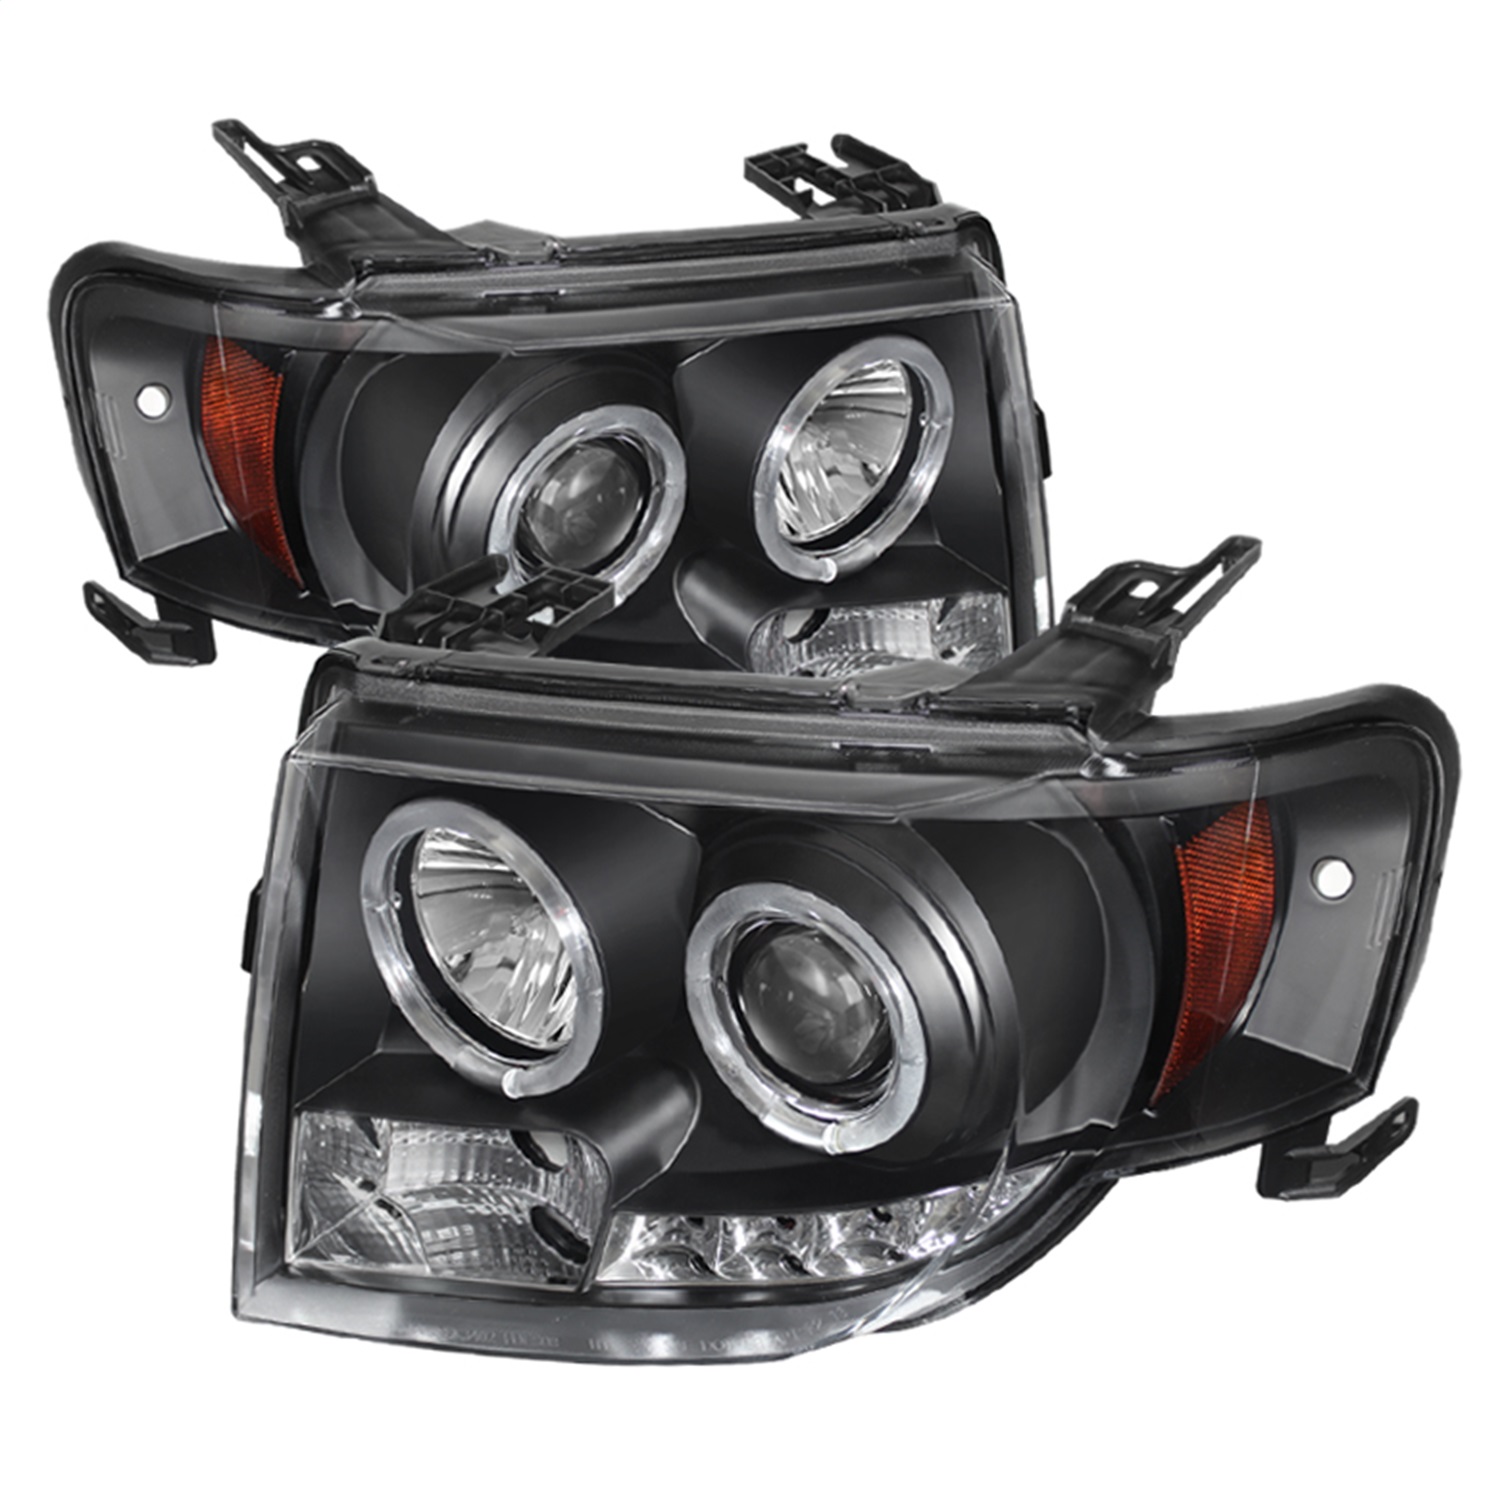 Spyder Auto 5074225 DRL Projector Headlights Fits 08-12 Escape